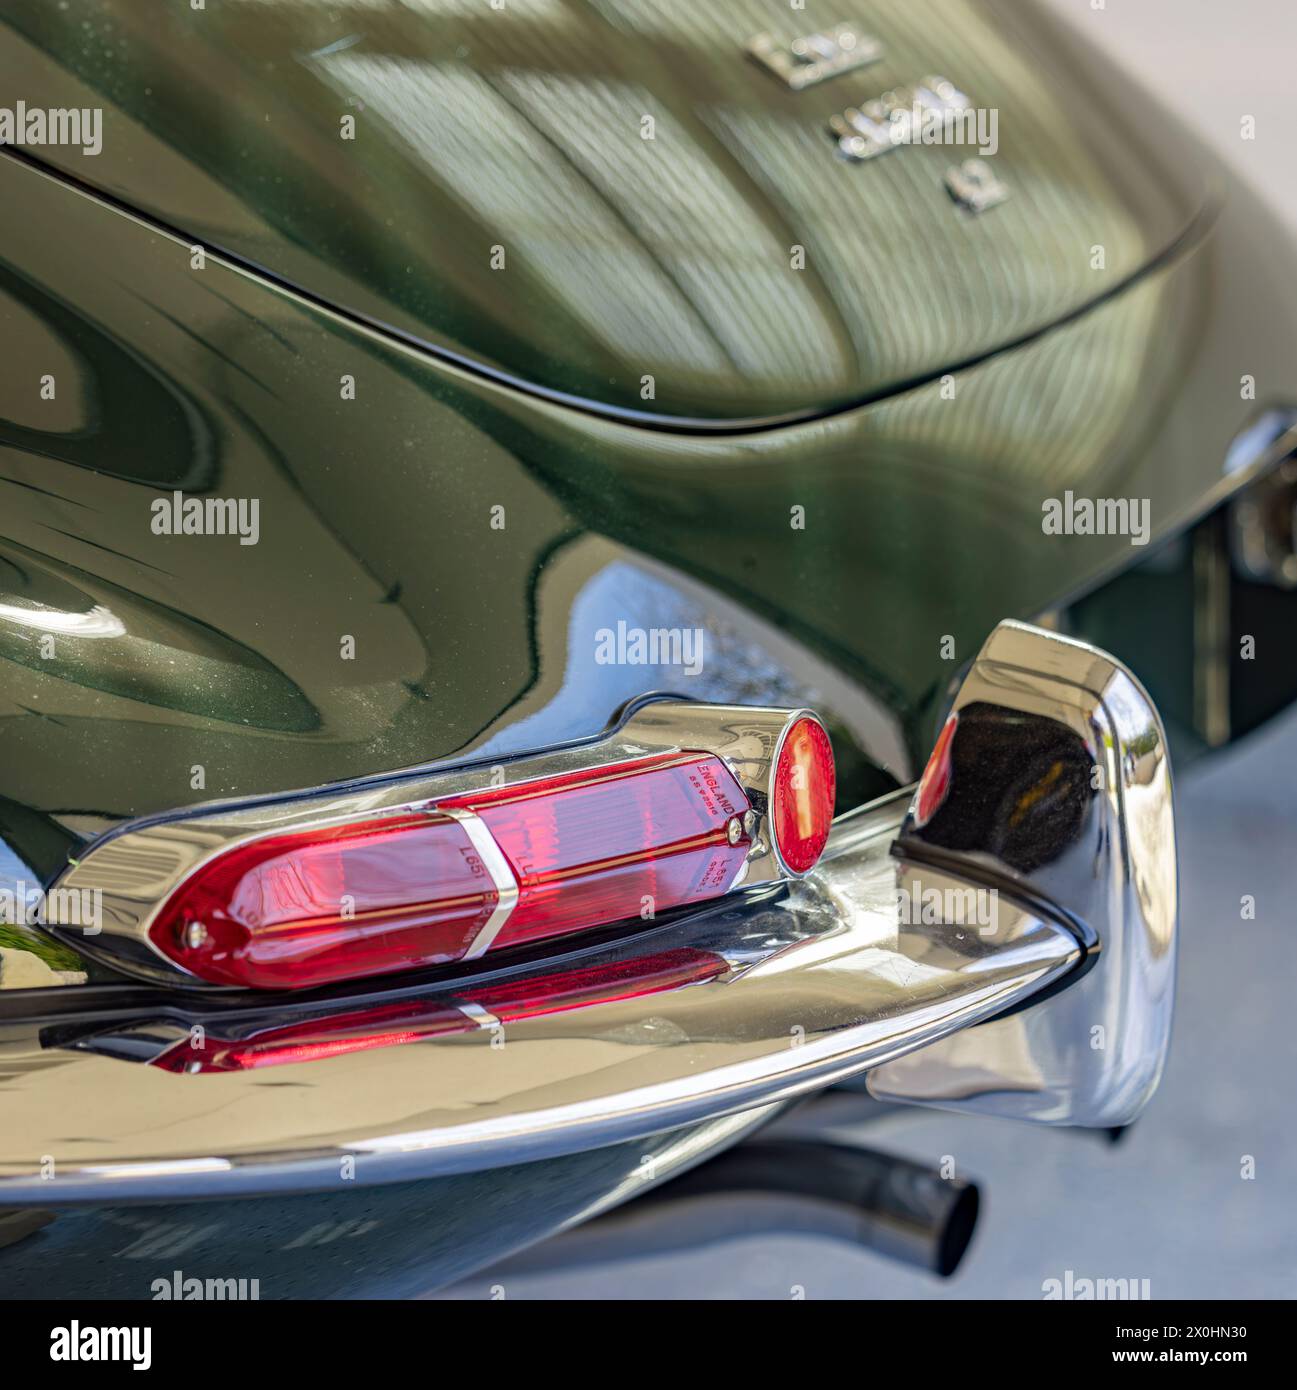 detail image of the tail lights of an old E type Jaguar 4.2 Stock Photo